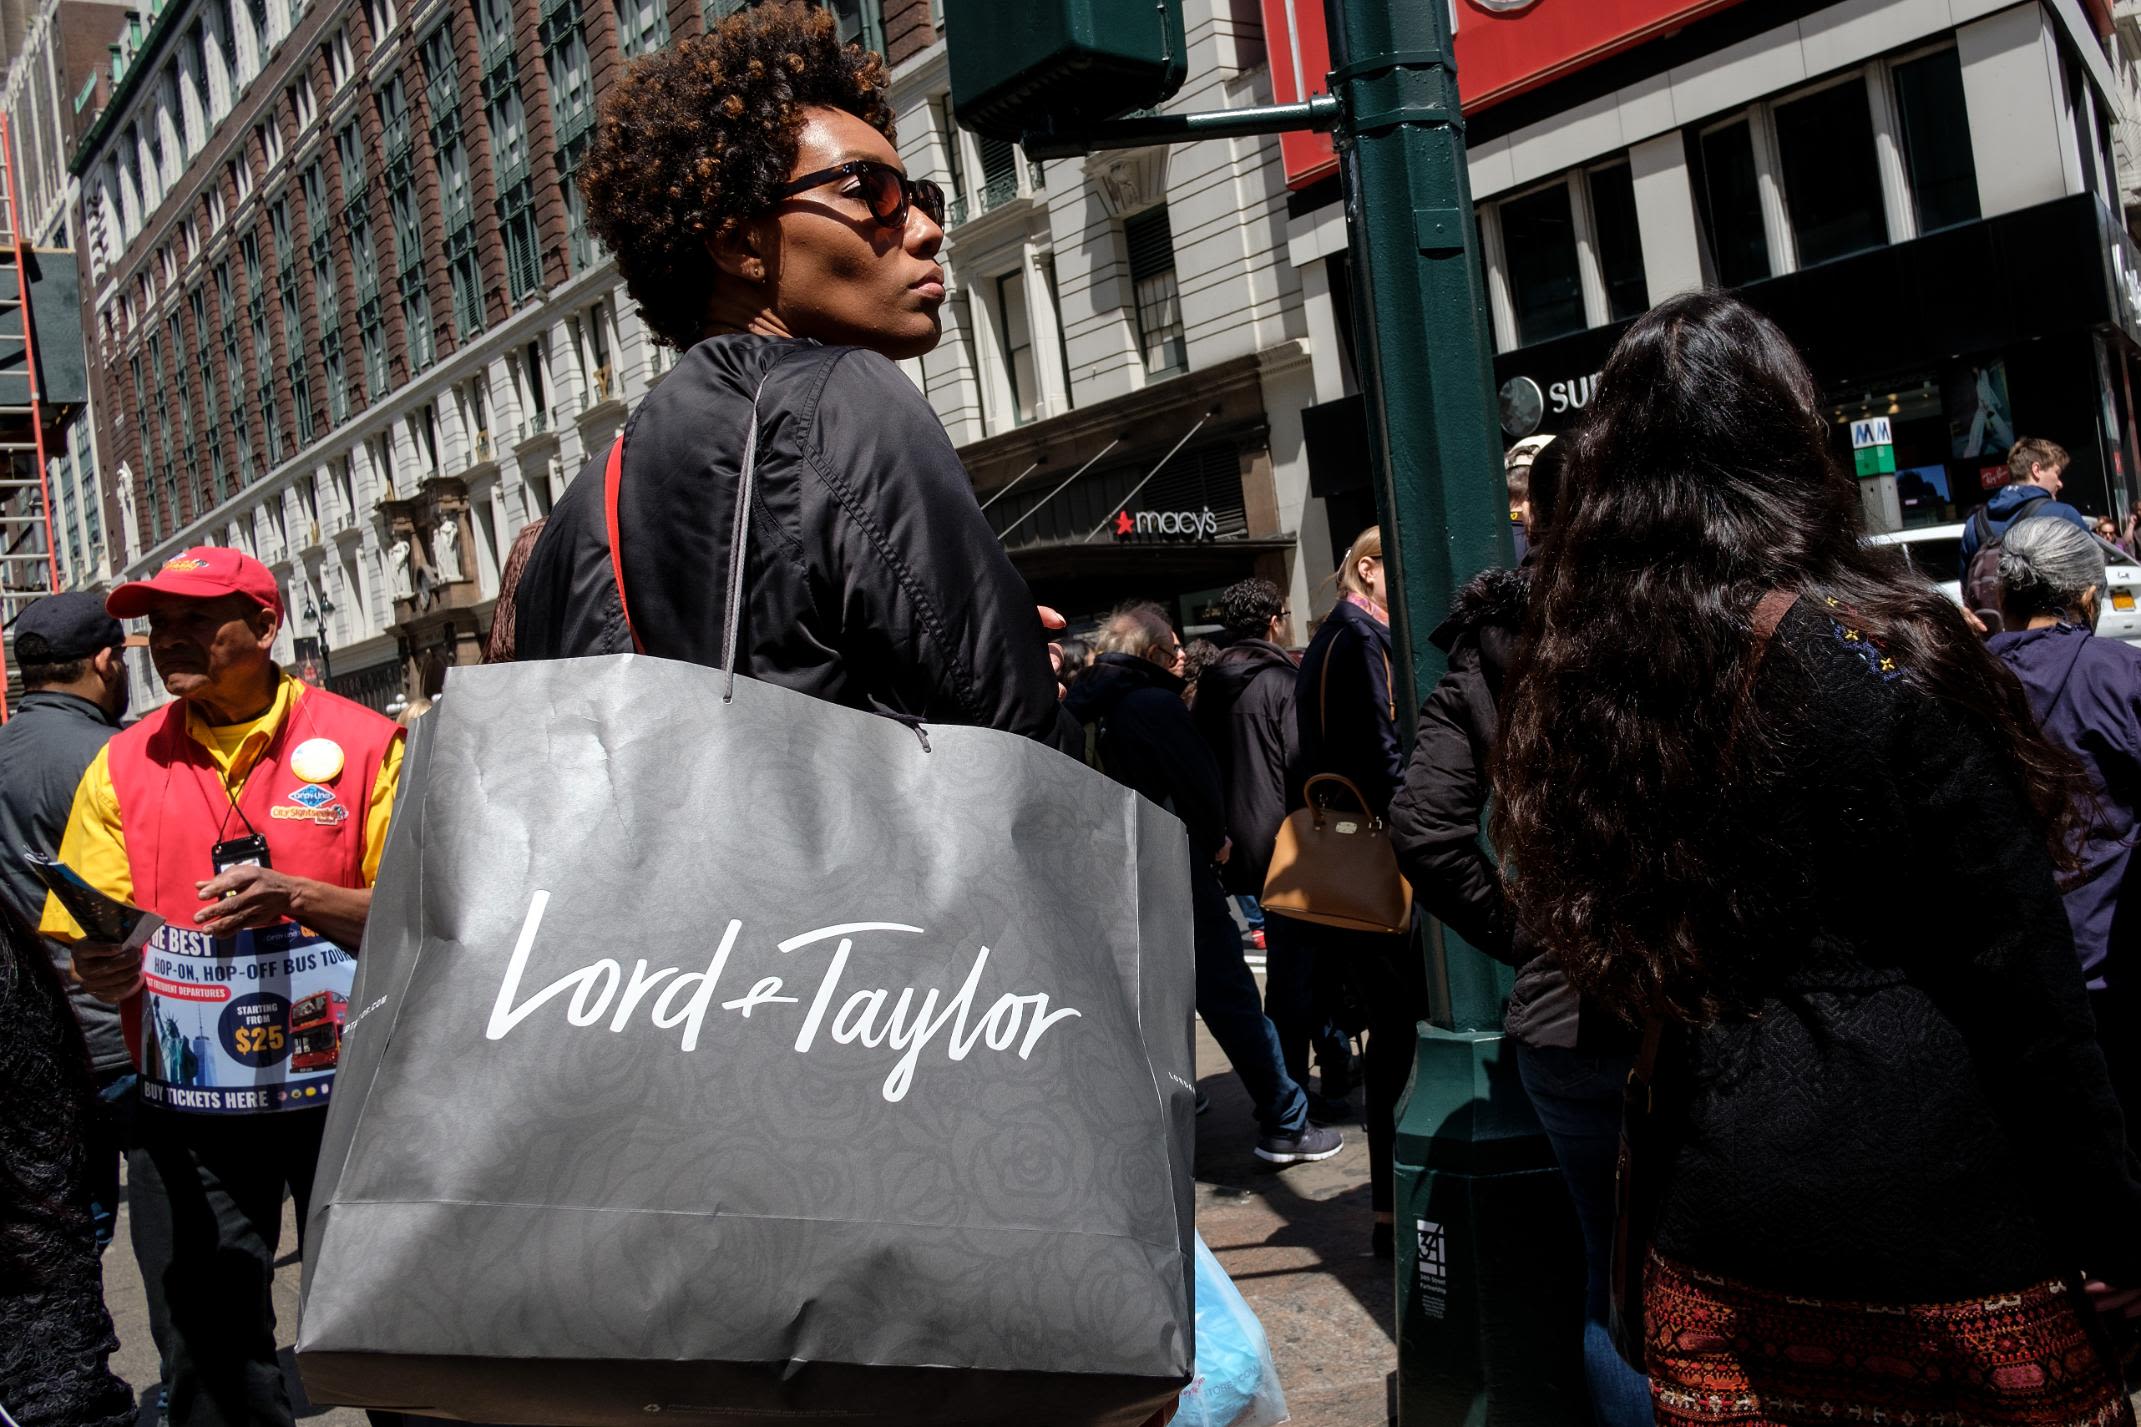 Walmart Goes Upscale, Offering Lord & Taylor Brands - The New York